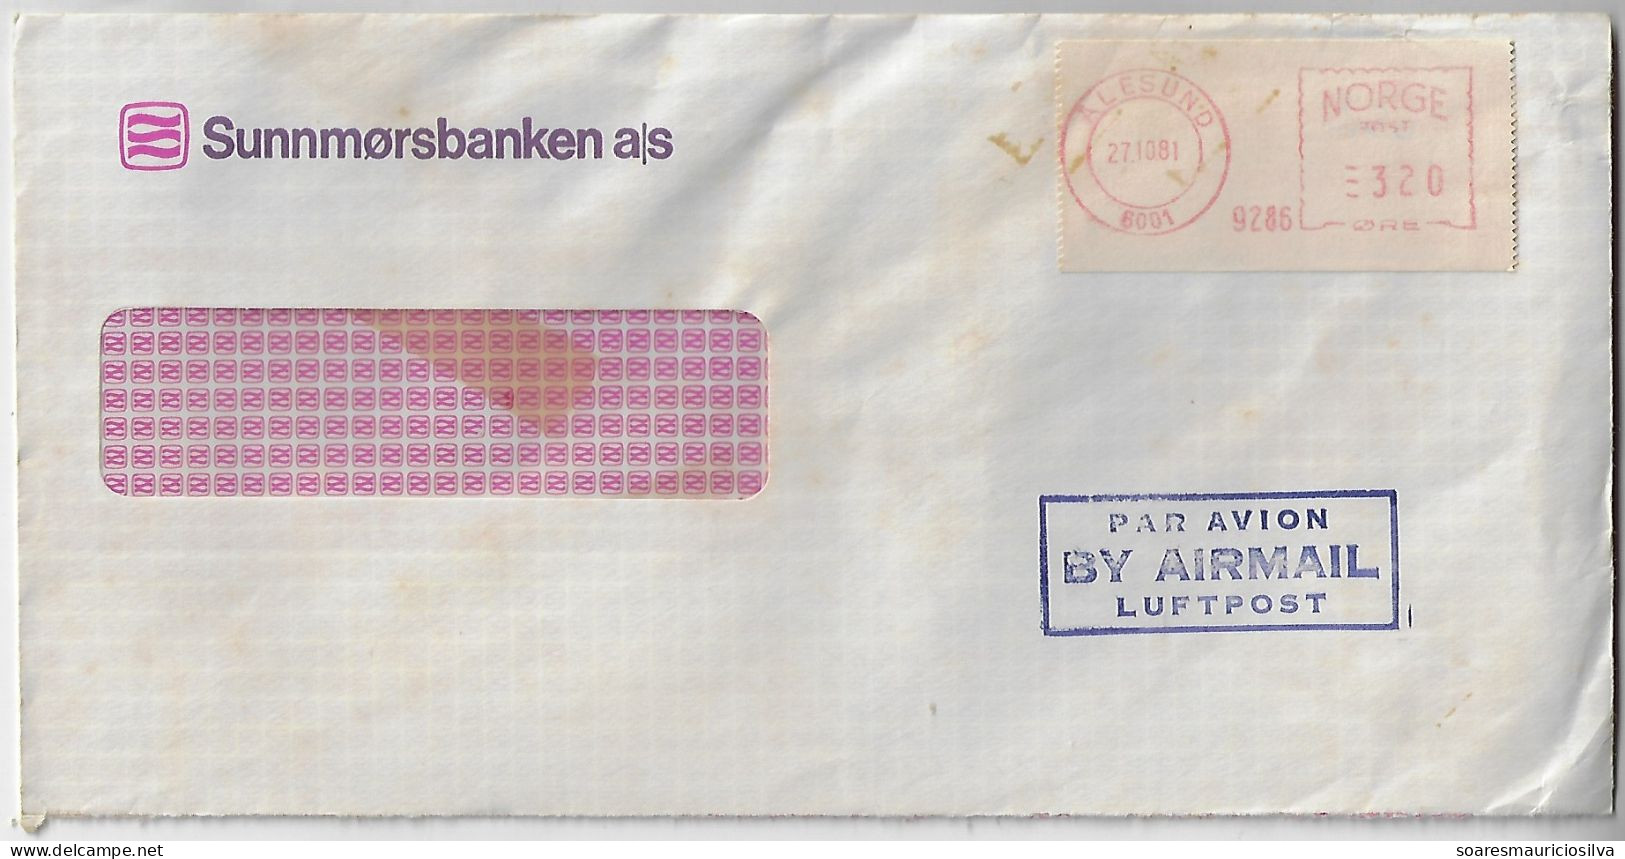 Norway 1981 Sunnmørsbanken airmail Cover Sent From Alesund Meter Stamp Pitney Bowes "5000" - Lettres & Documents